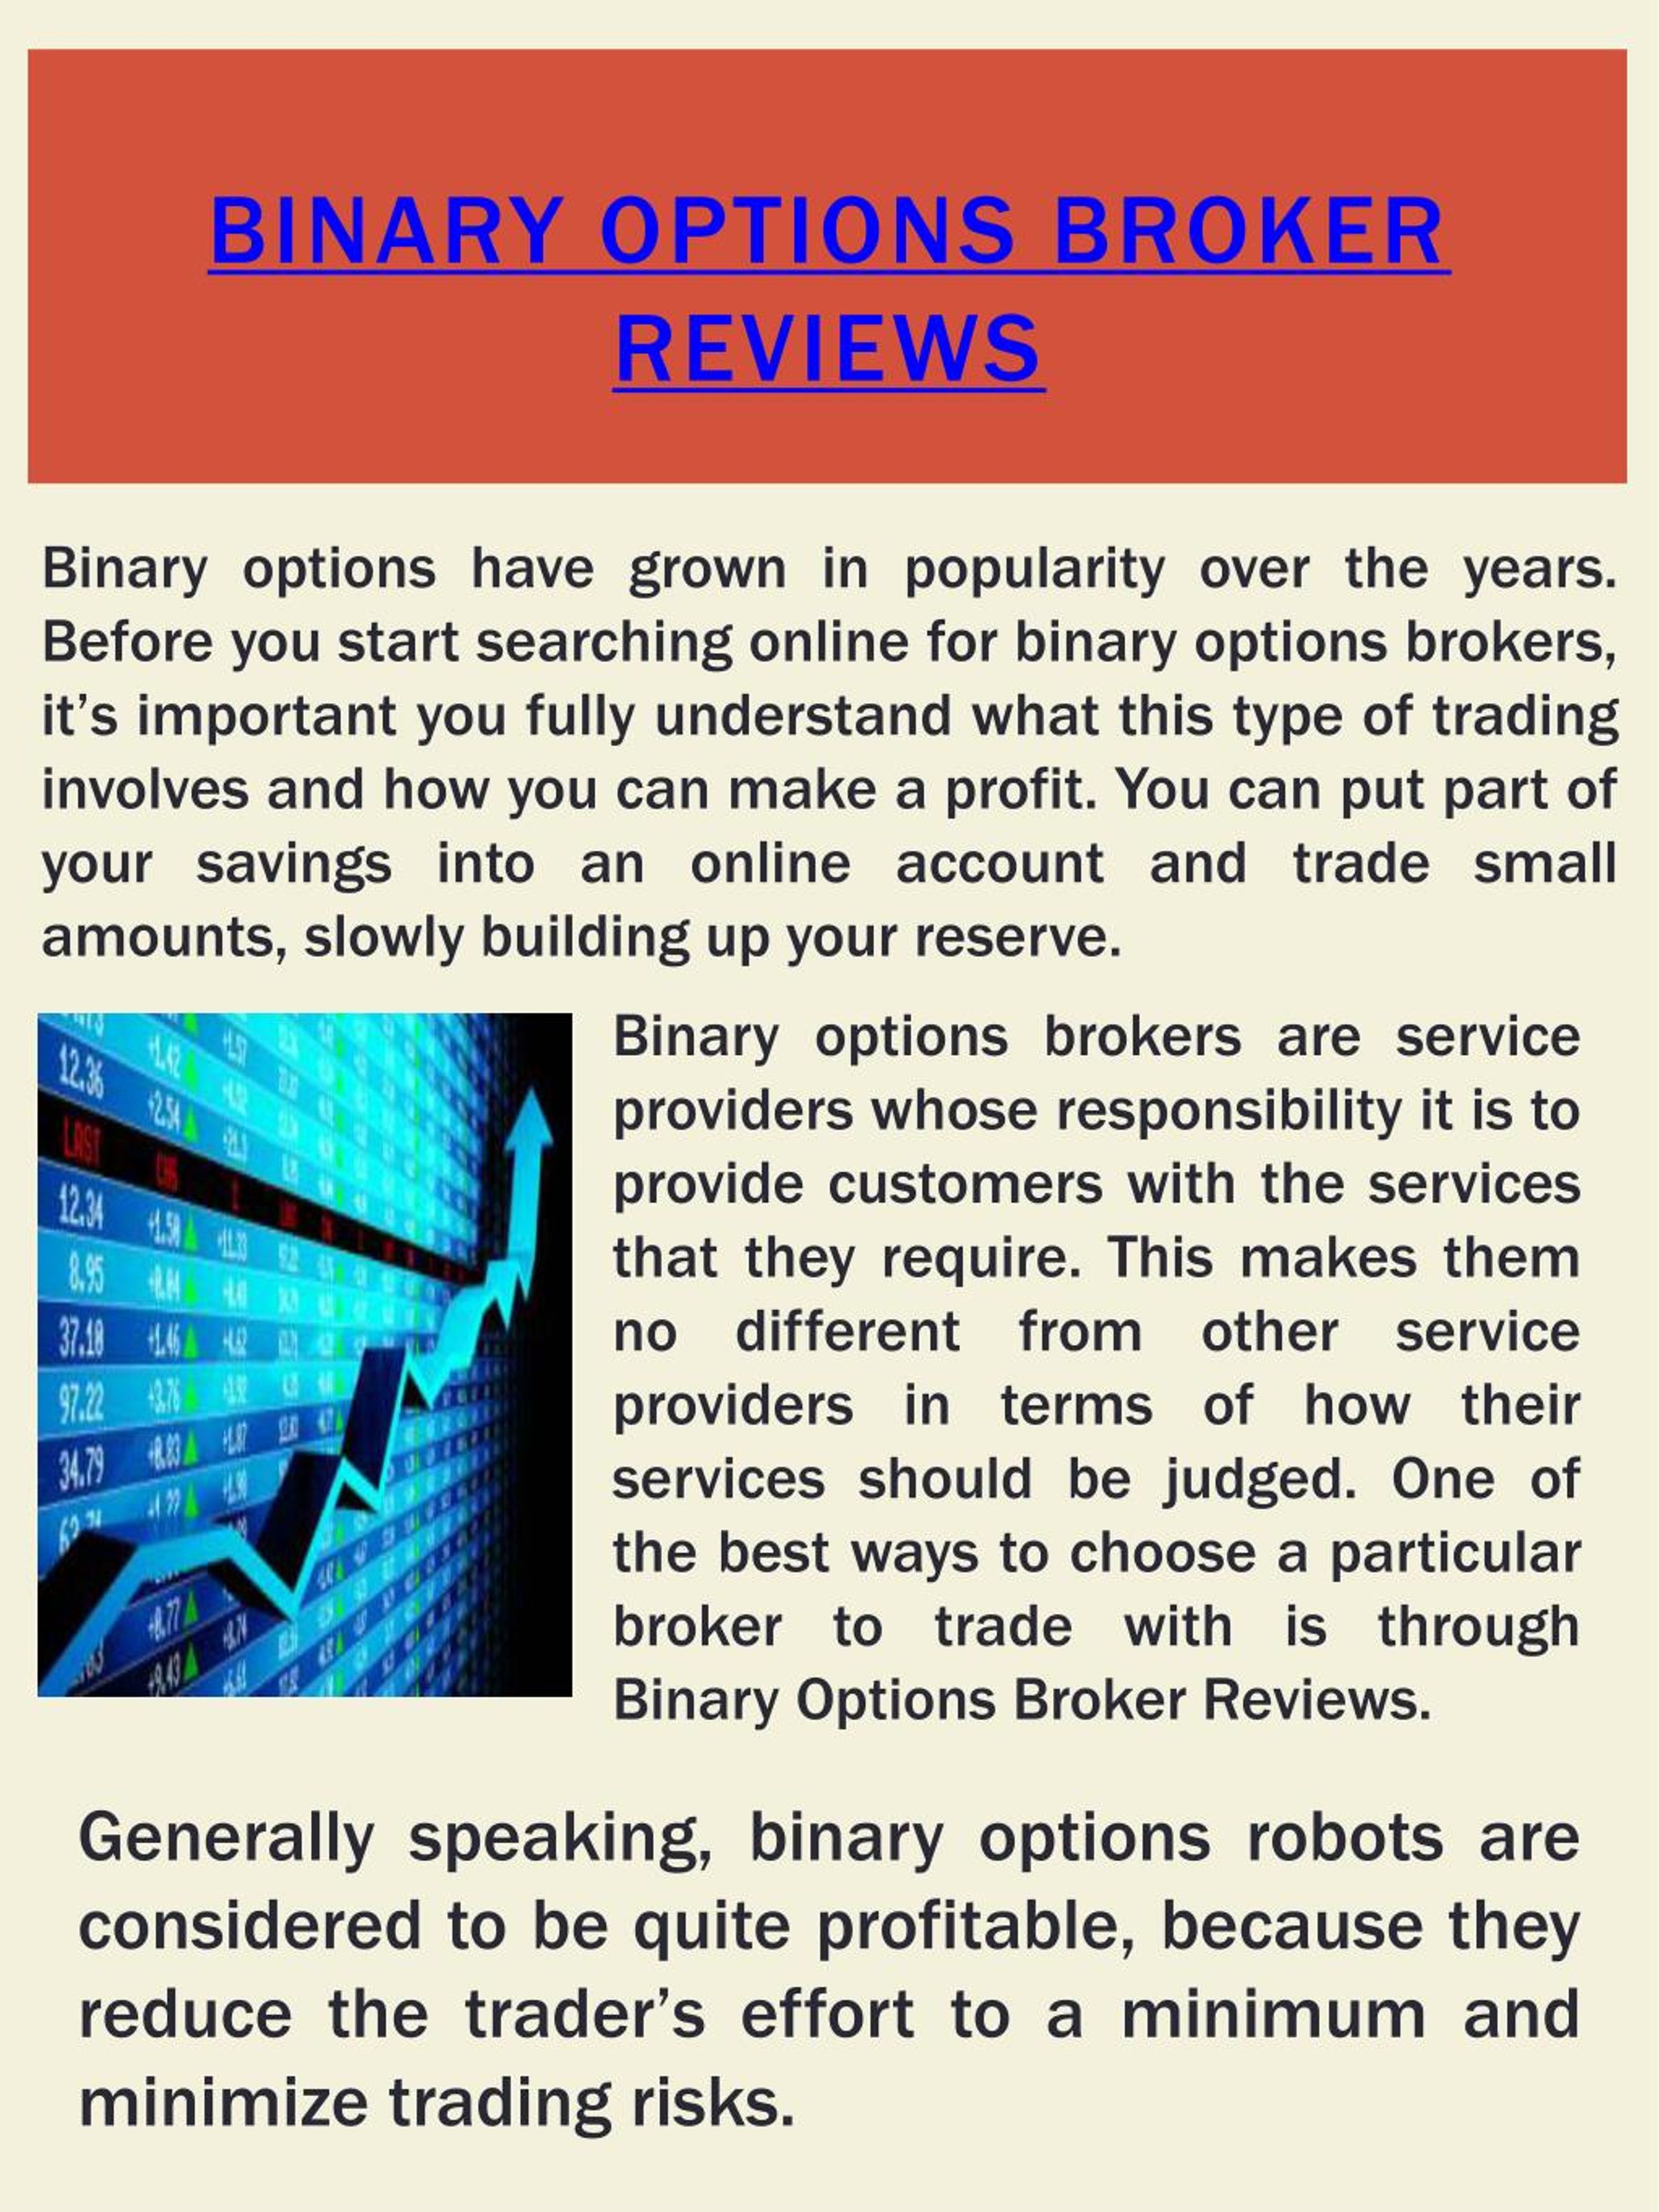 binary options brokers meaning